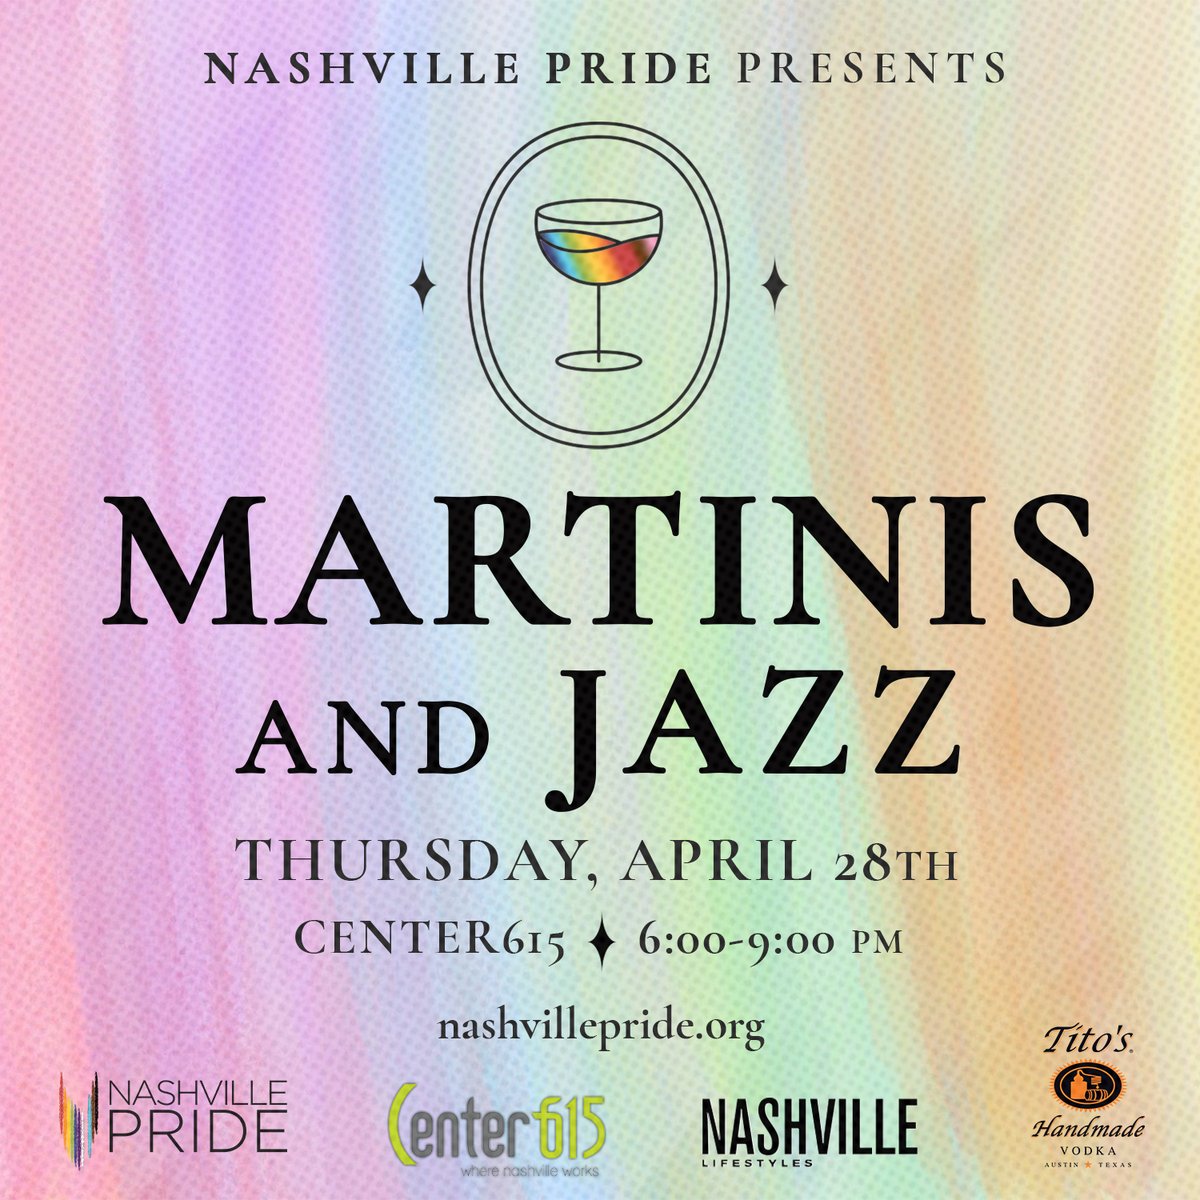 Join us April 28th 6-9pm at @Center615 for the return of Martinis + Jazz Fundraiser!🍸🎷 The event includes a silent auction w/ fantastic items, martinis + live music 🎶 Funds from this event help support the annual Nashville Pride Festival + Parade 🏳️‍🌈 nashvillepride.org/martinisandjazz